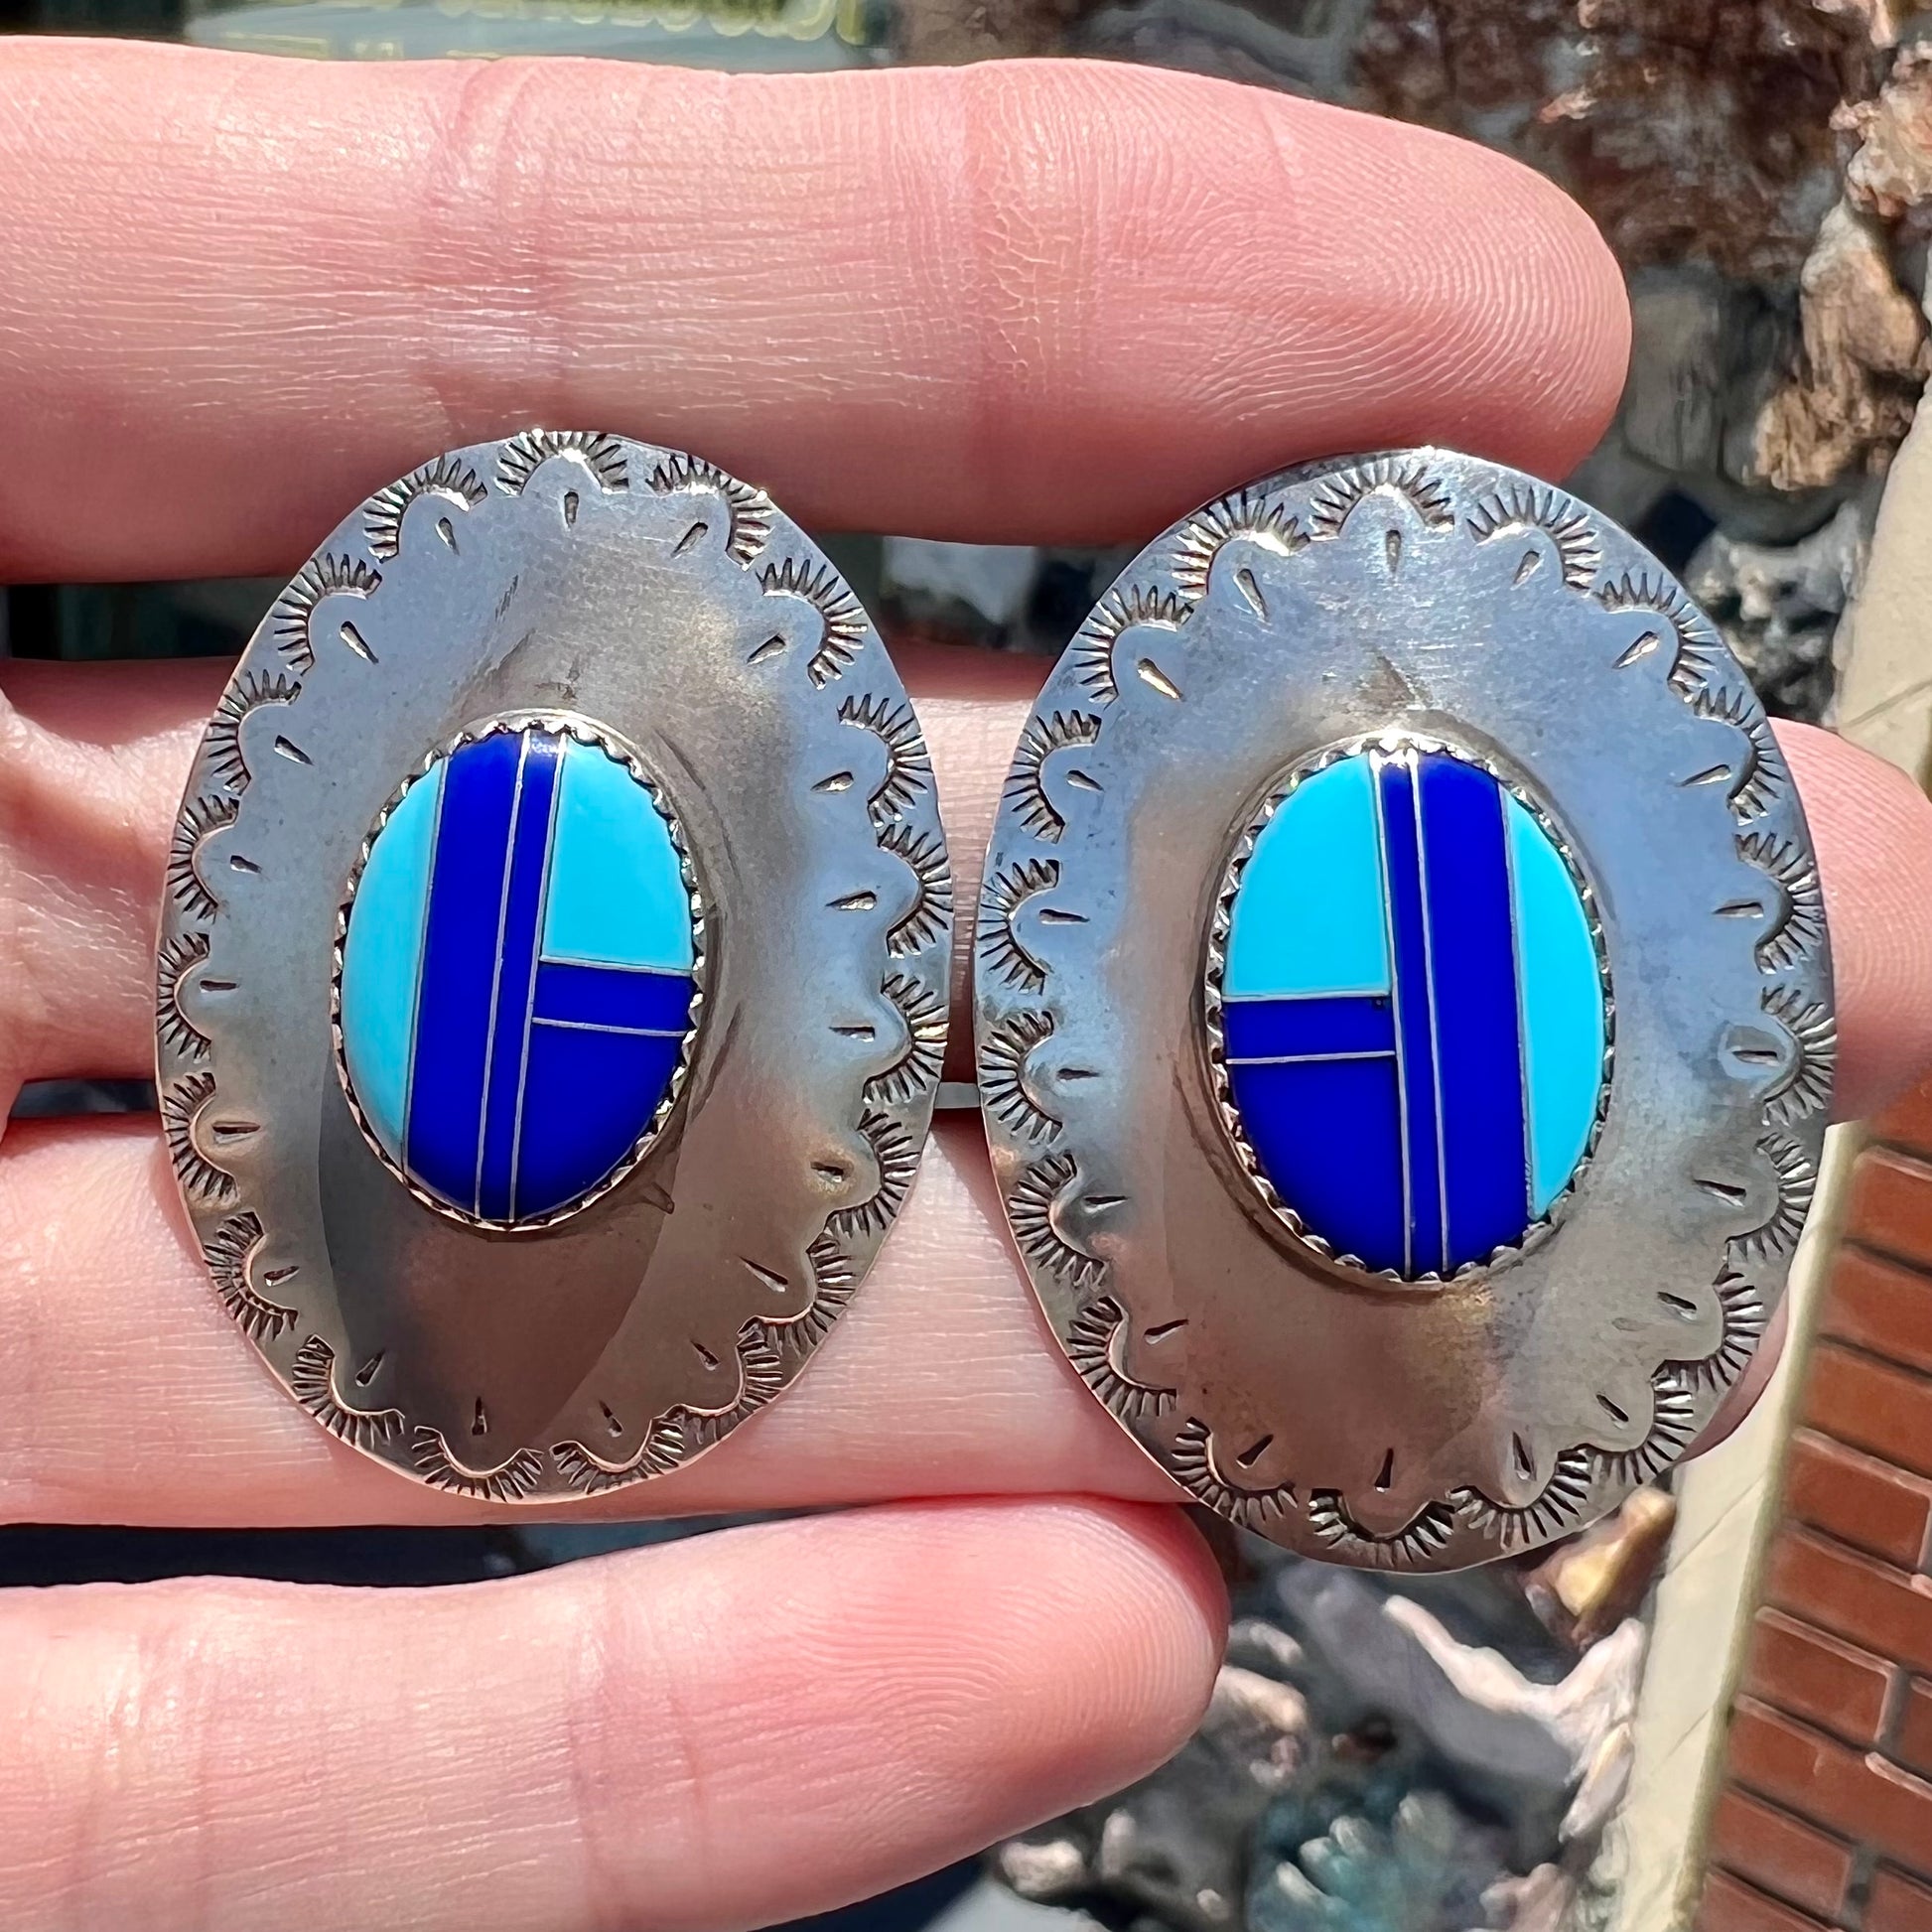 A pair of sterling silver concho earrings set with lapis lazuli and turquoise stone inlay.